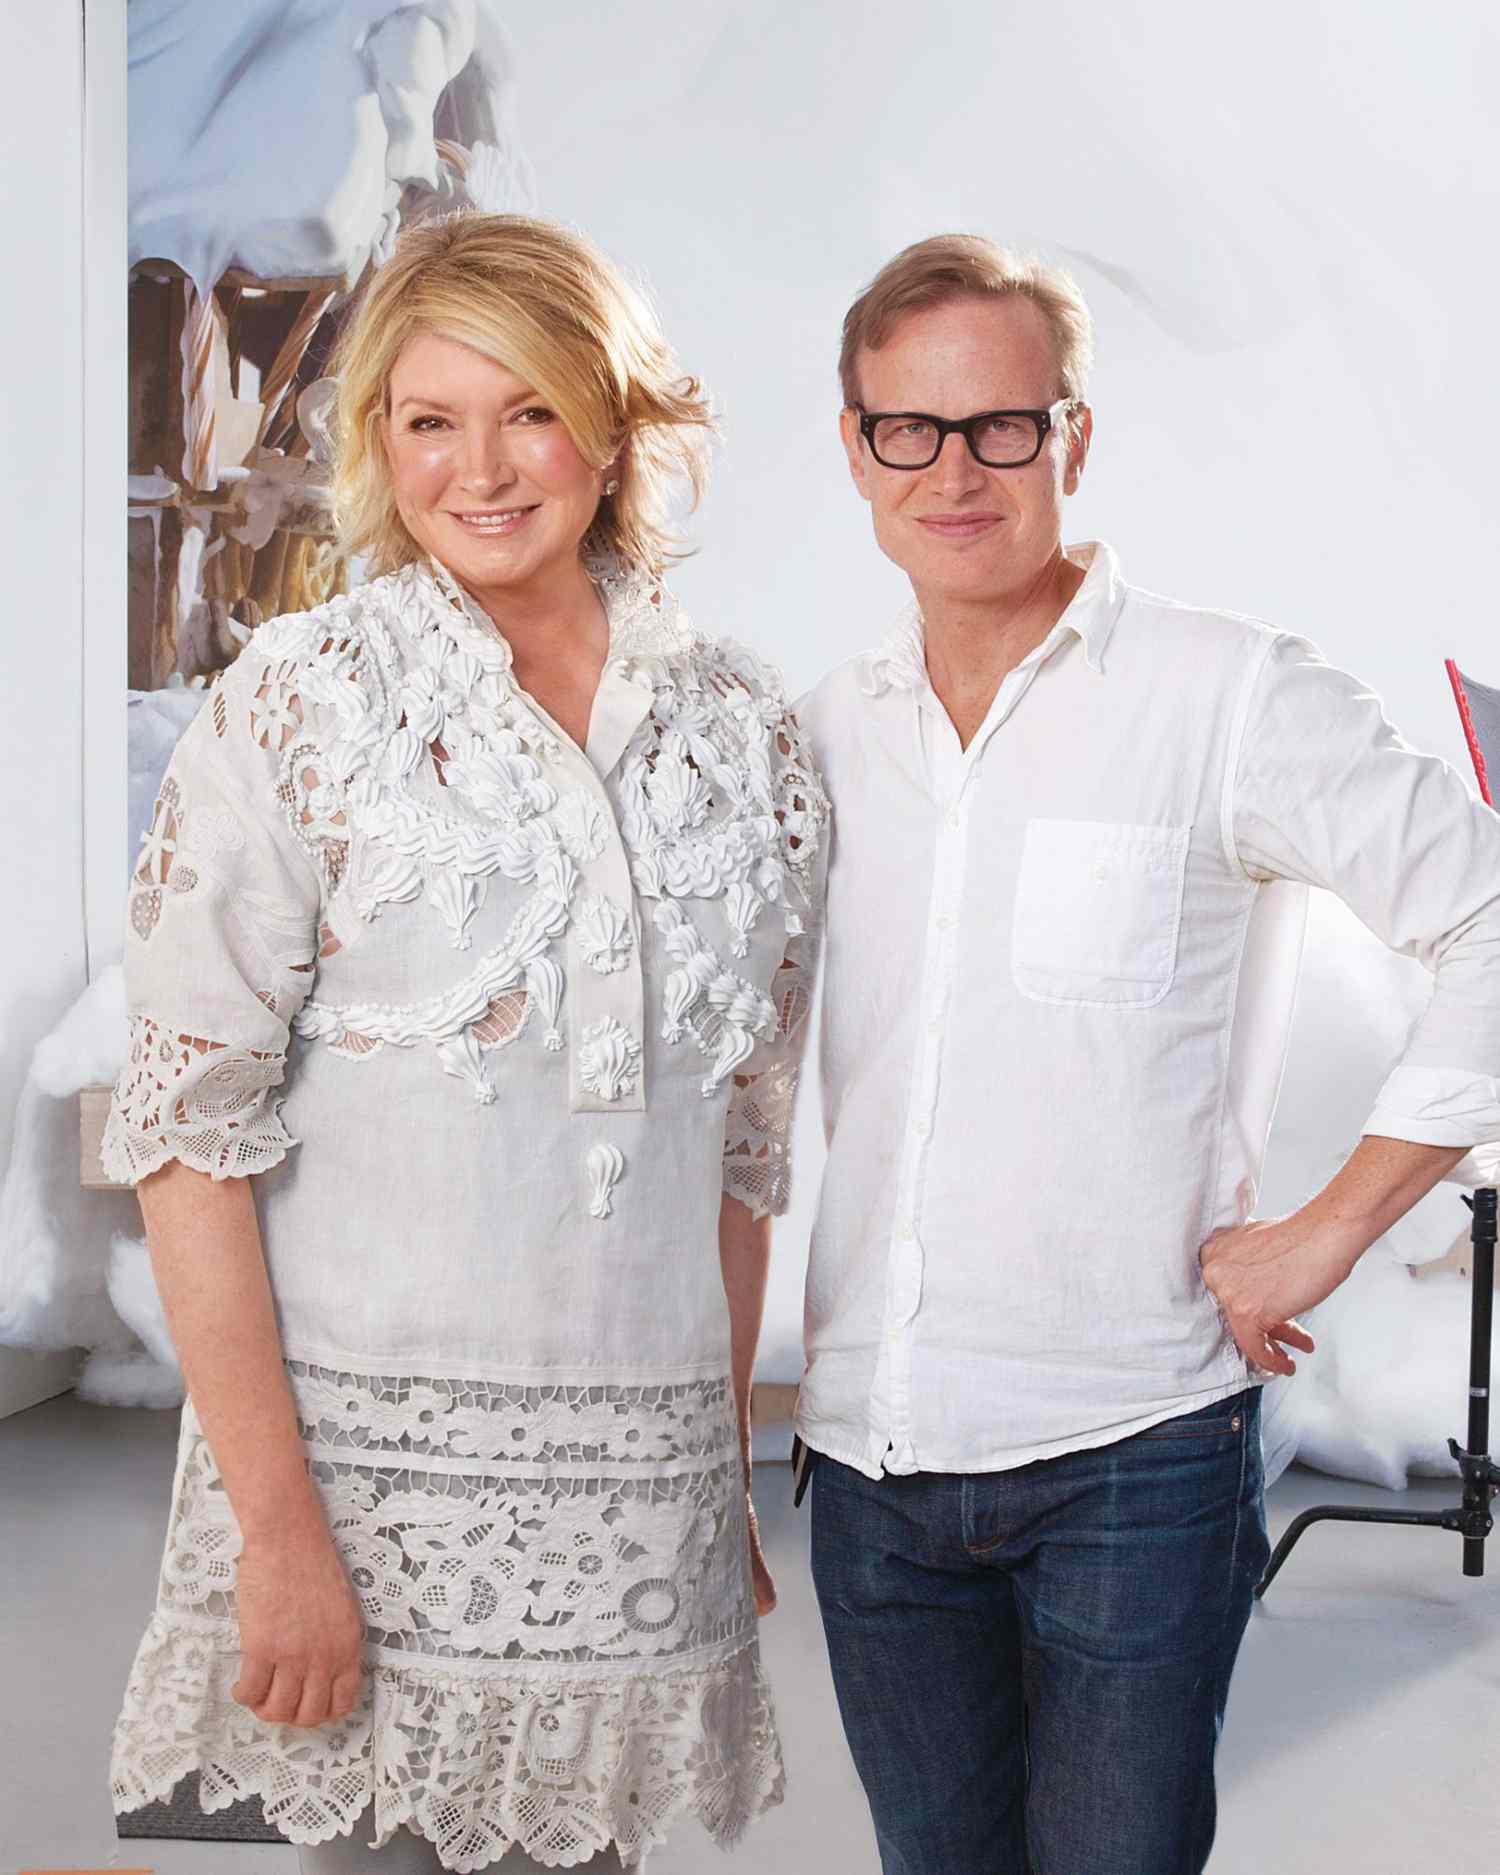 <p>Our founder celebrated the 25th anniversary of Martha Stewart Living much like she does everything else—in a one-of-a-kind ensemble for the holidays. Often celebrated for her costumes, Martha took this holiday look to the next level with a top created by artist Will Cotton and pastry chef Jason Schreiber, curated by Living's former style editor Kate Berry. "In his sweet heaven of a studio in downtown Manhattan, Will Cotton works not just with paint and paper and brushes, but with sugar, flour, and egg whites," Martha shared in her celebratory column in the December 2015 issue of Living. "He also, as artists are wont to do, brings in other materials—in this case, a flexible and inedible substance with which he embellished my Valentino dress. He transformed it from a lacy summer linen frock into an object worthy of inclusion in his idea of a sugary-white winter wonderland, into which he painted me so artistically and beautifully."</p>
                            